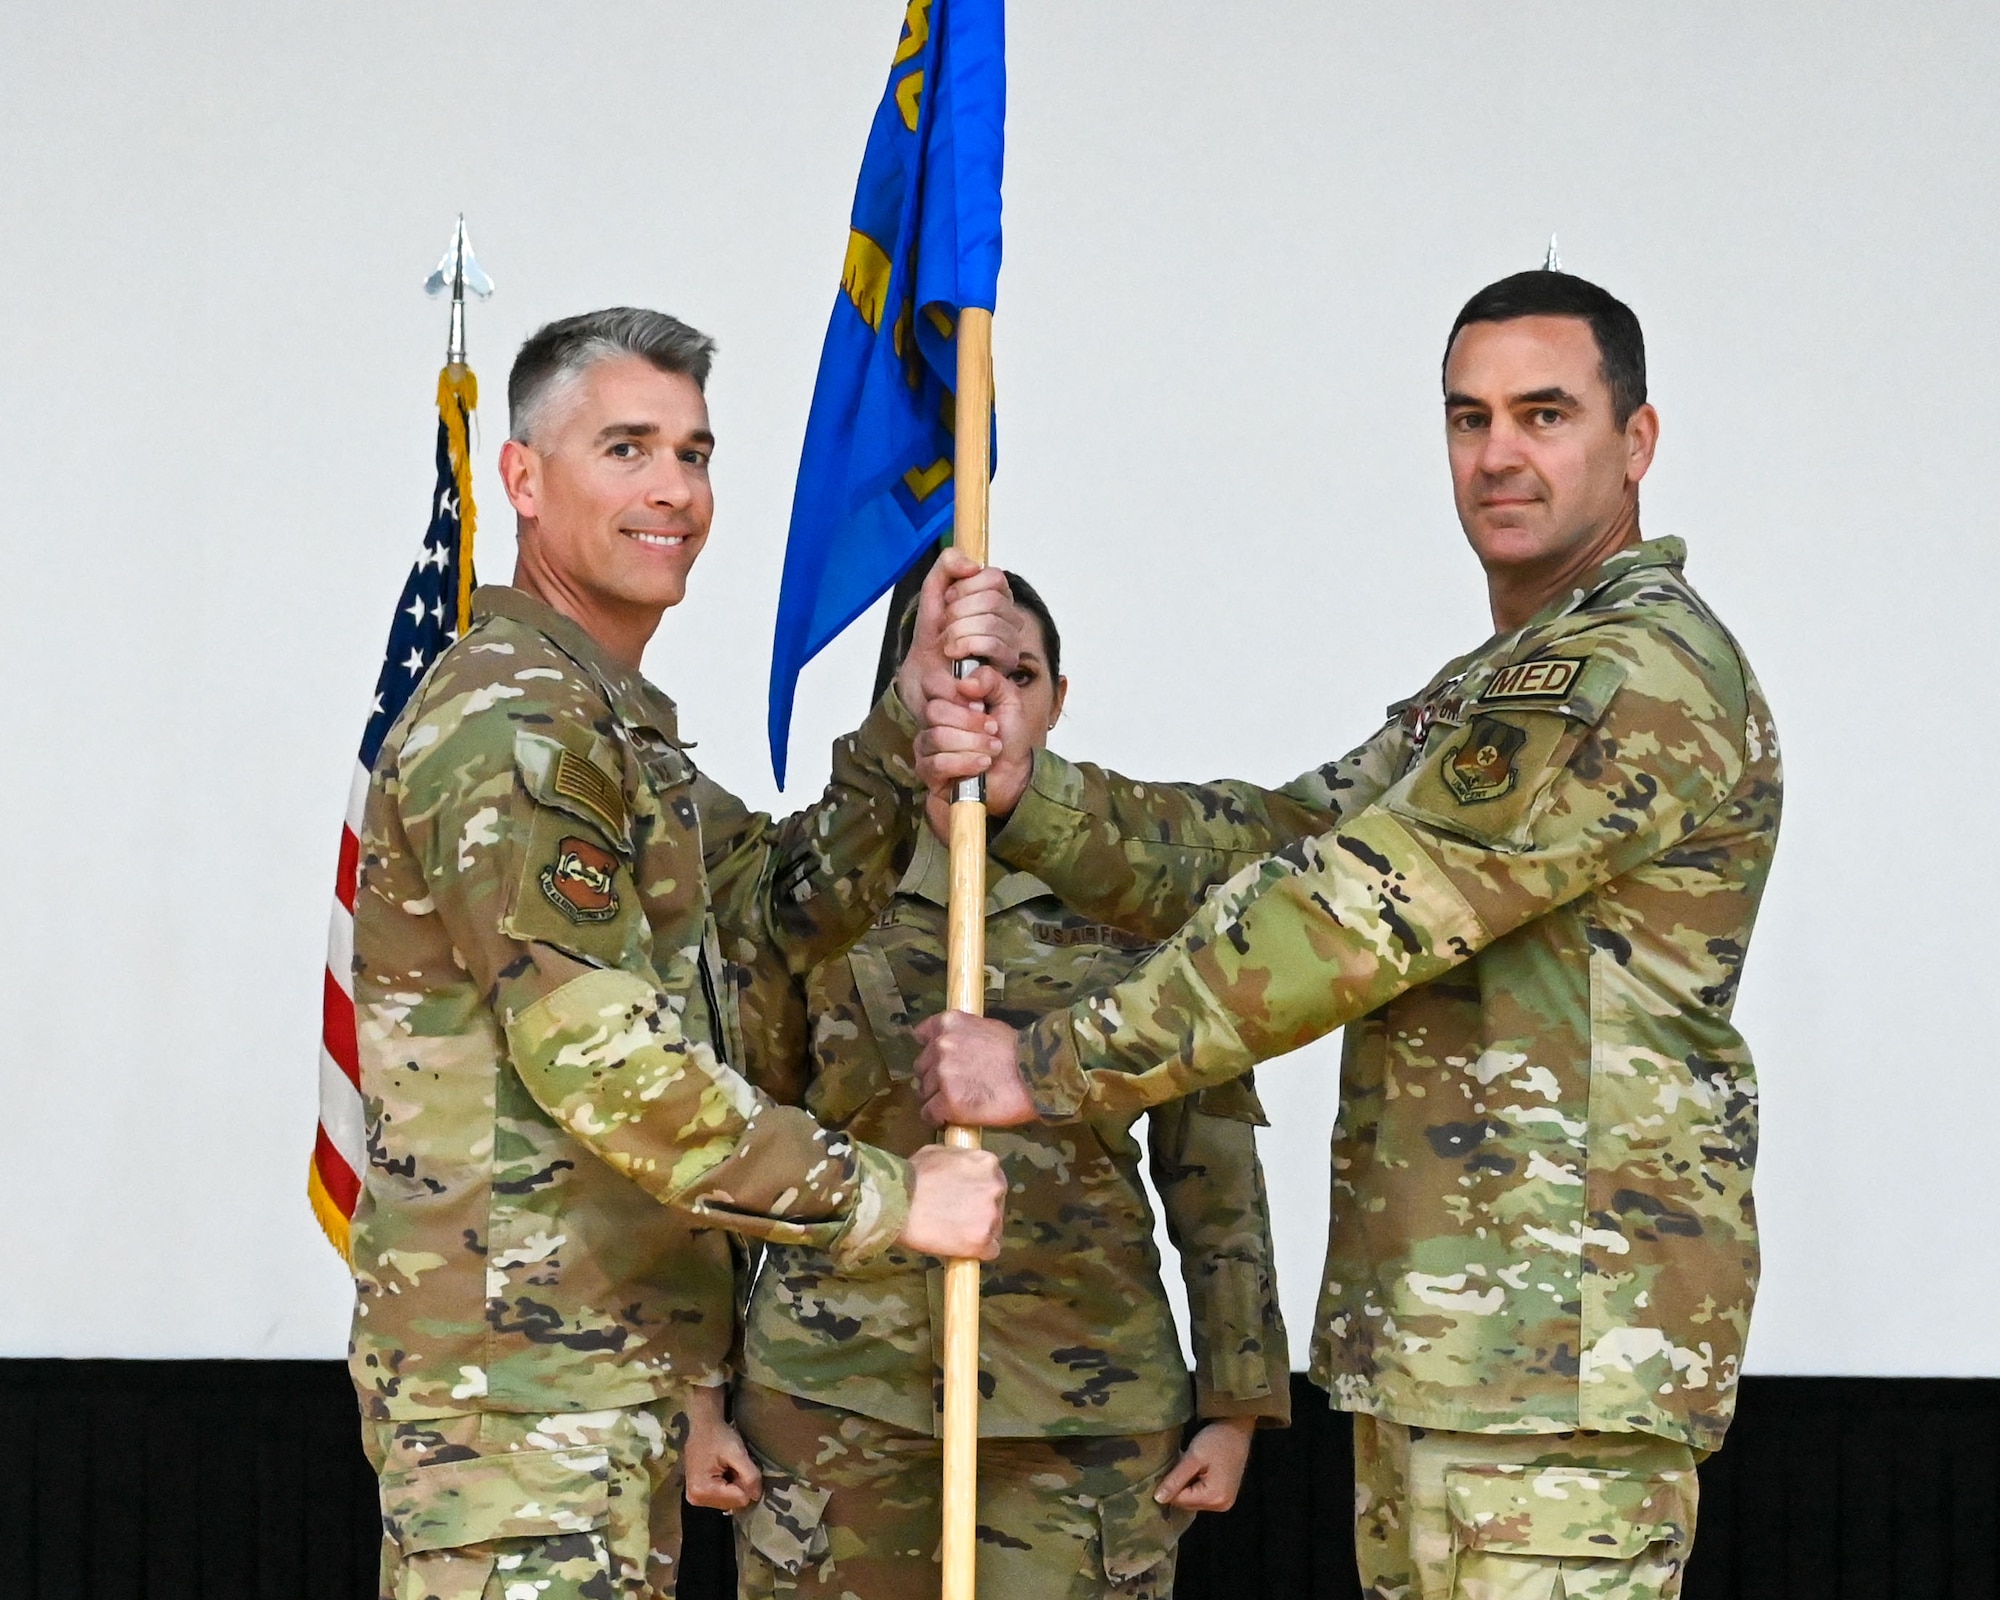 Lt. Col. John Stubbs, outgoing 386th Expeditionary Medical Squadron commander, passes the guidon to Col. George Buch, 386th Air Expeditionary Wing commander, during a change of command ceremony at Ali Al Salem Air Base, Kuwait, May 30, 2023. Stubbs passed the guidon back to Buch as a symbol of relinquishing command of the unit.